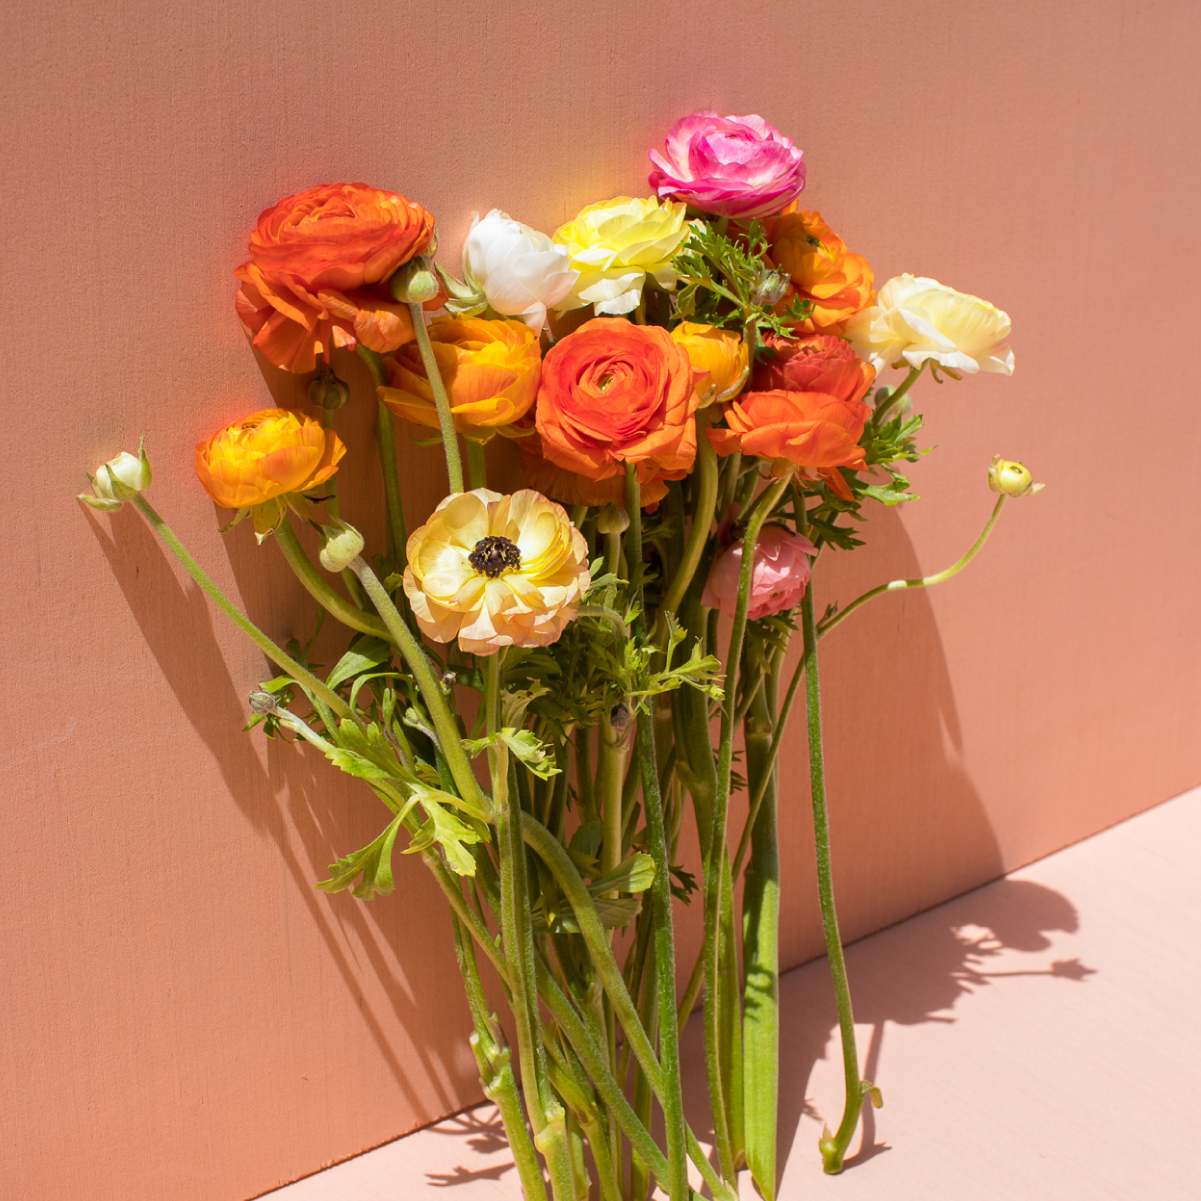 bouquet of pink, orange and yellow ranunculus flowers against a peach background